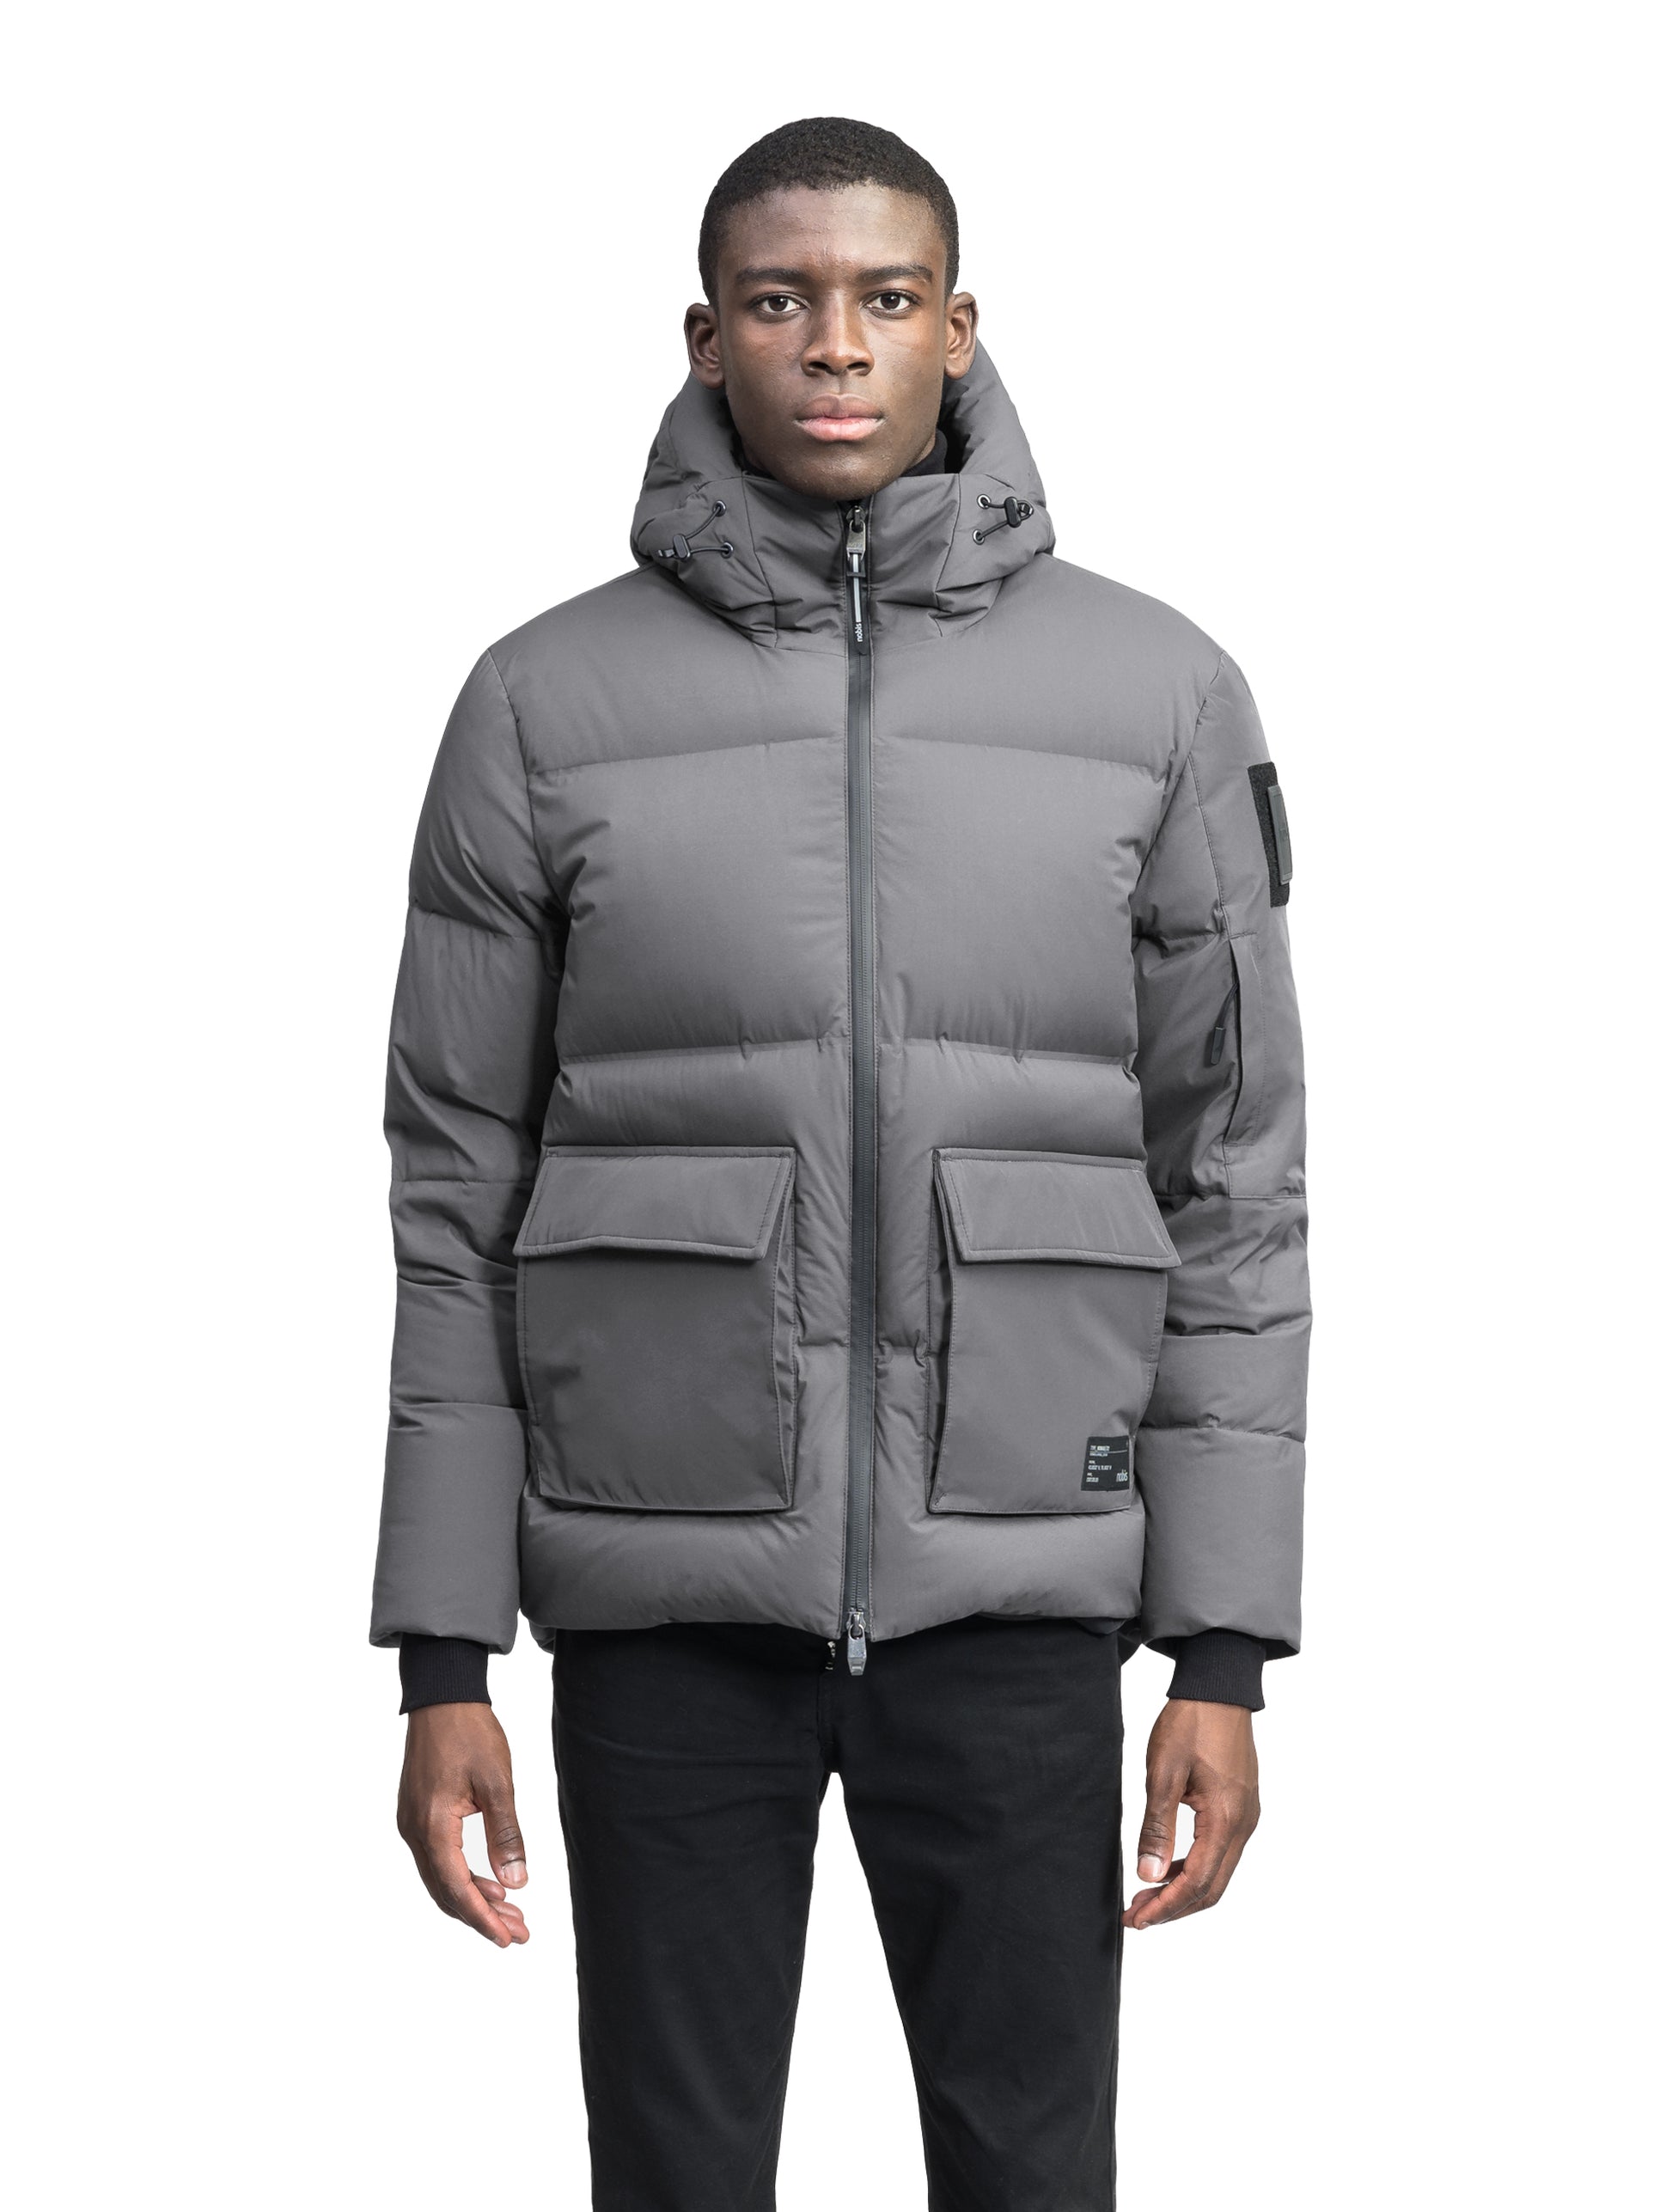 Supra Men's Performance Puffer in hip length, Technical Taffeta and 3-Ply Micro Denier fabrication, Premium Canadian White Duck Down insulation, non-removable down filled hood, centre front two-way zipper, flap pockets at waist, and zipper pocket at left bicep, in Concrete